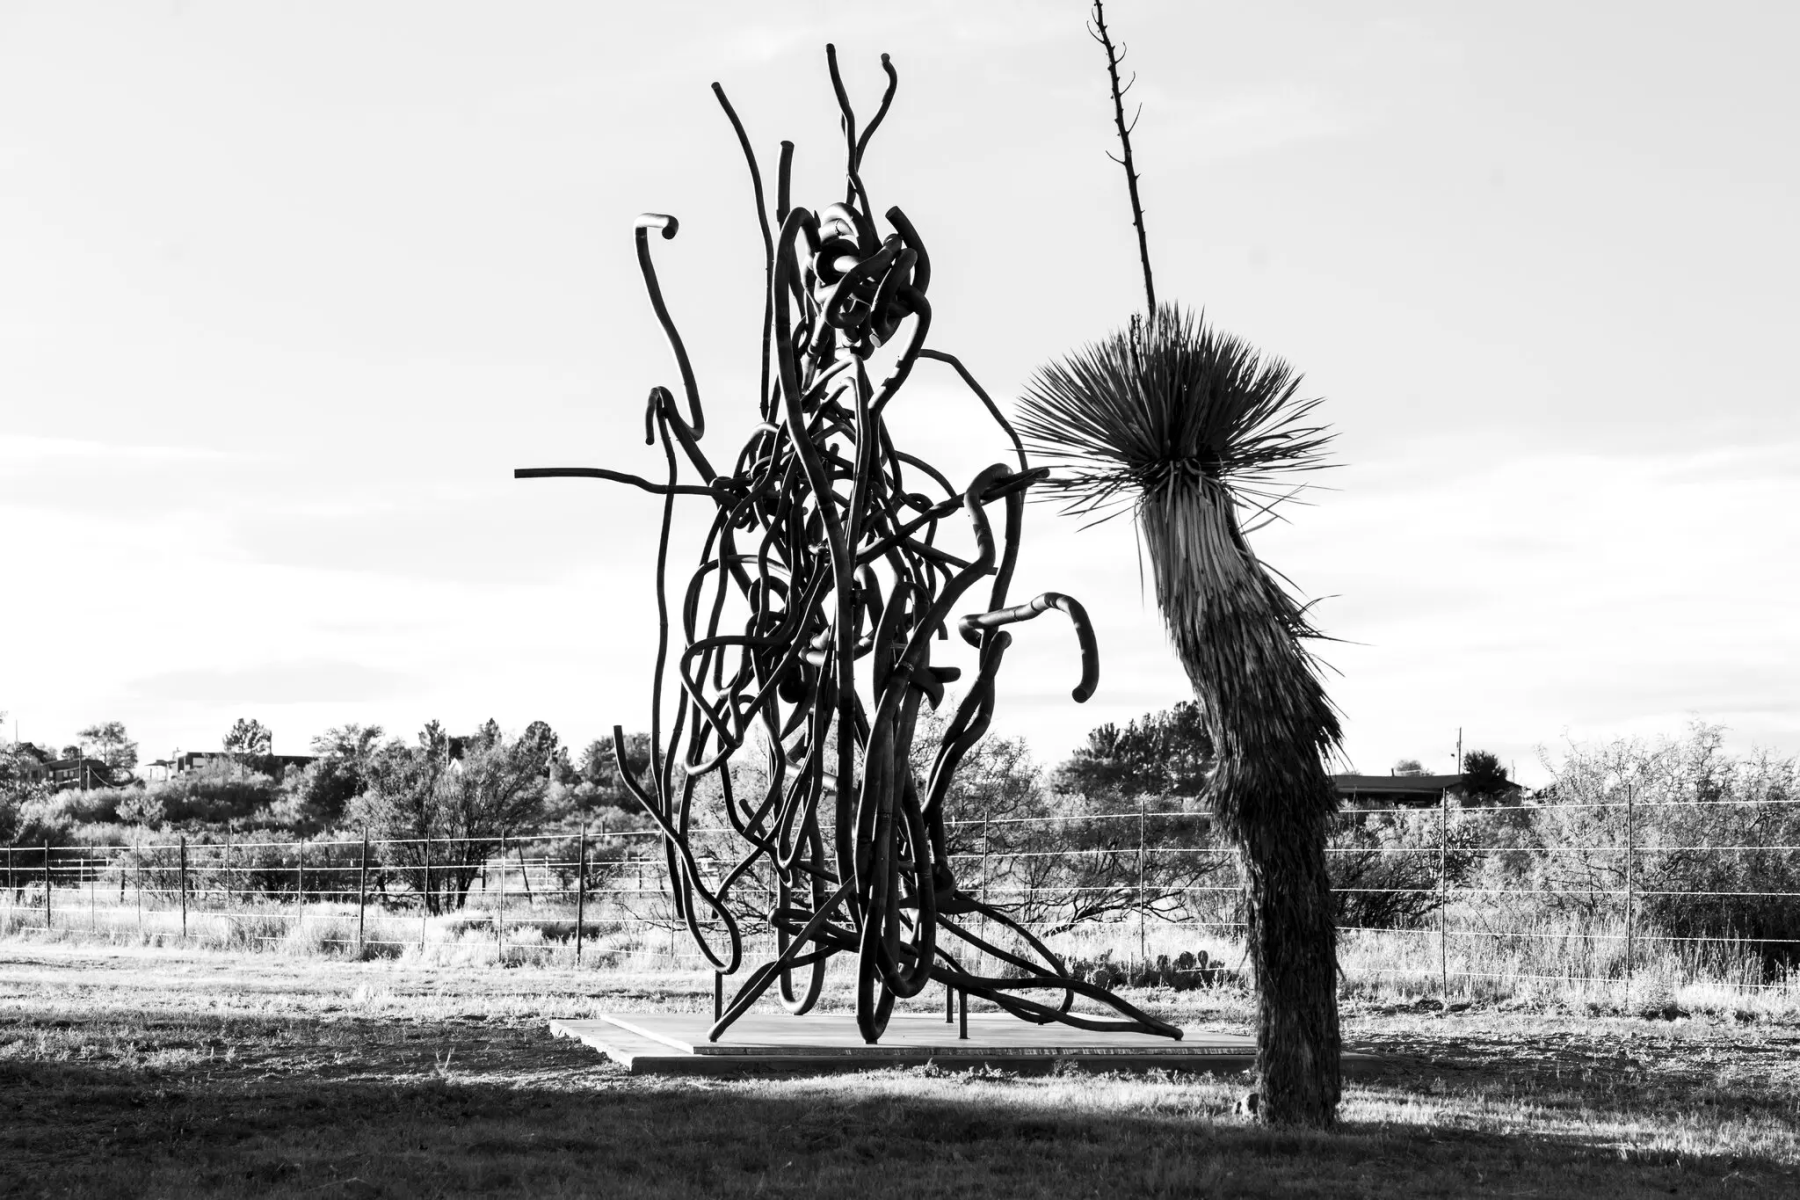 wire sculpture installed outdoors in the desert